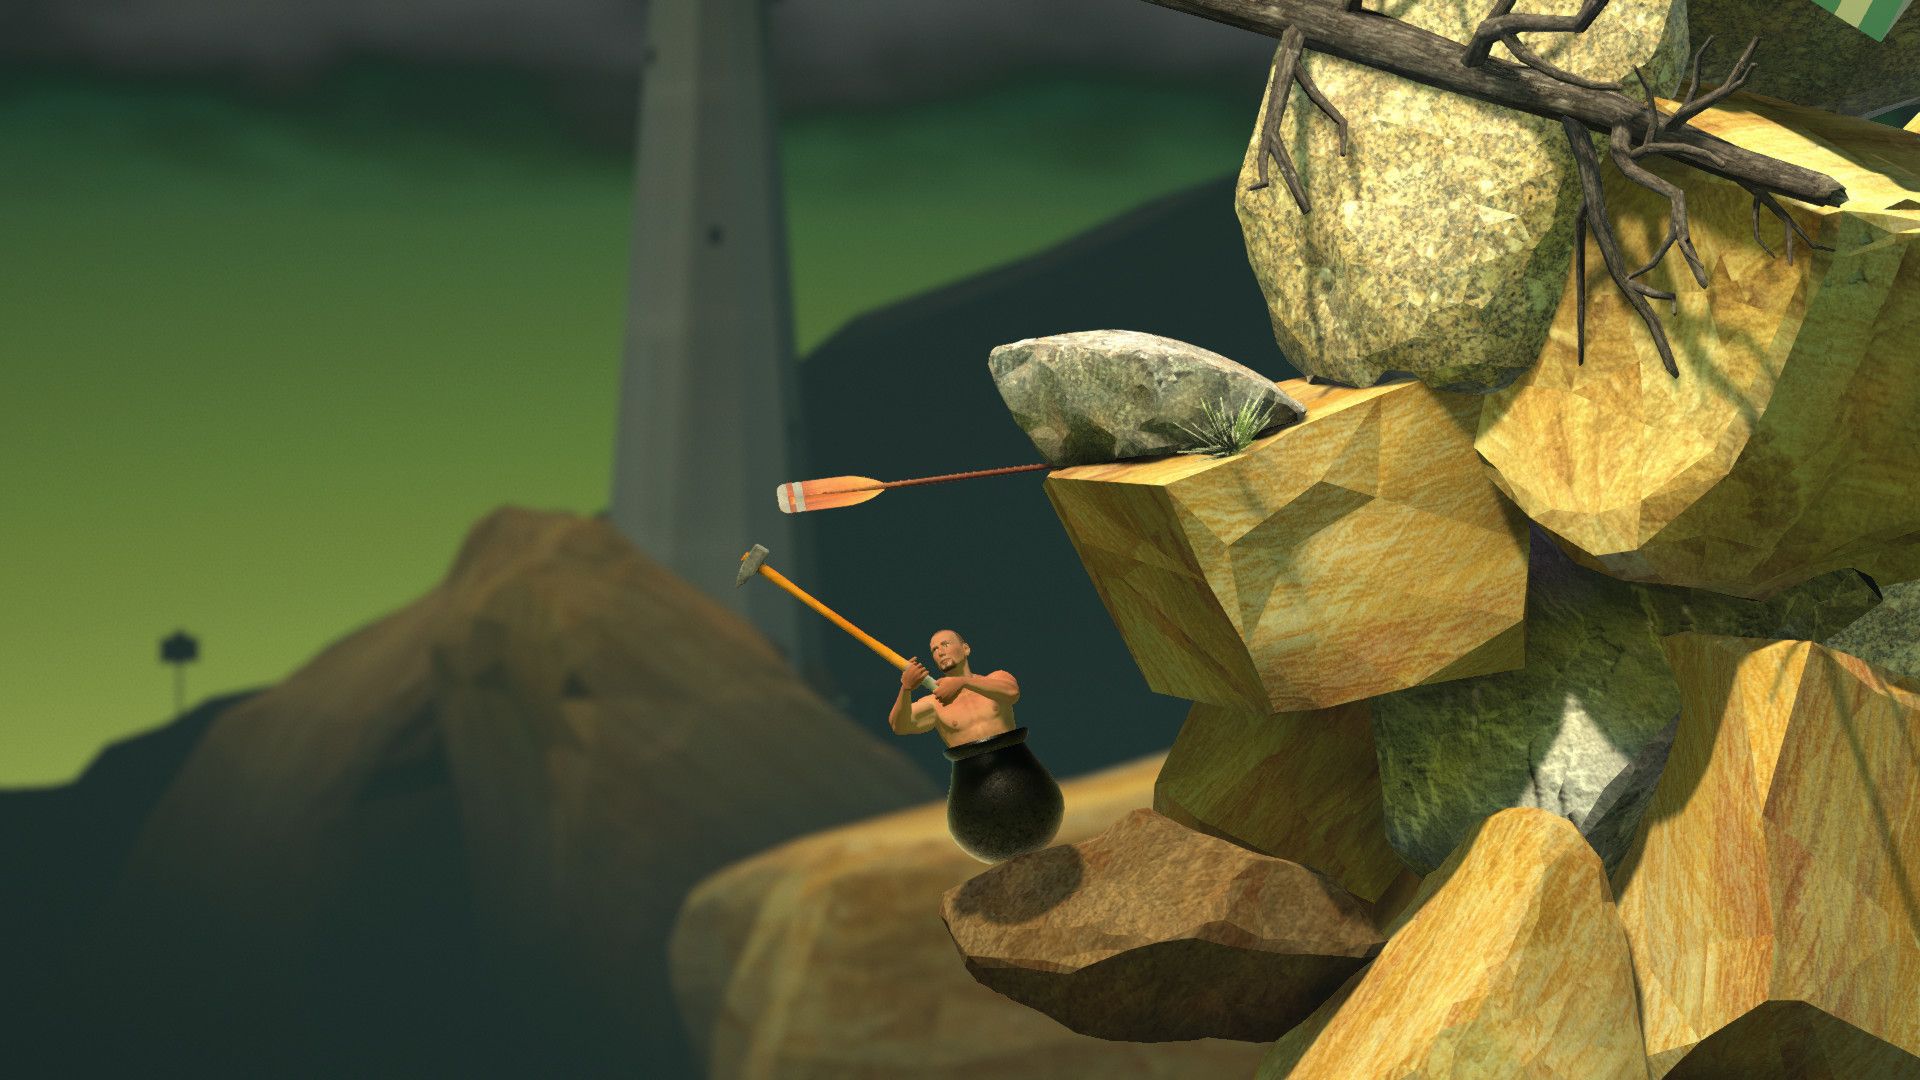 Getting Over It with Bennett Foddy screenshots, image and picture